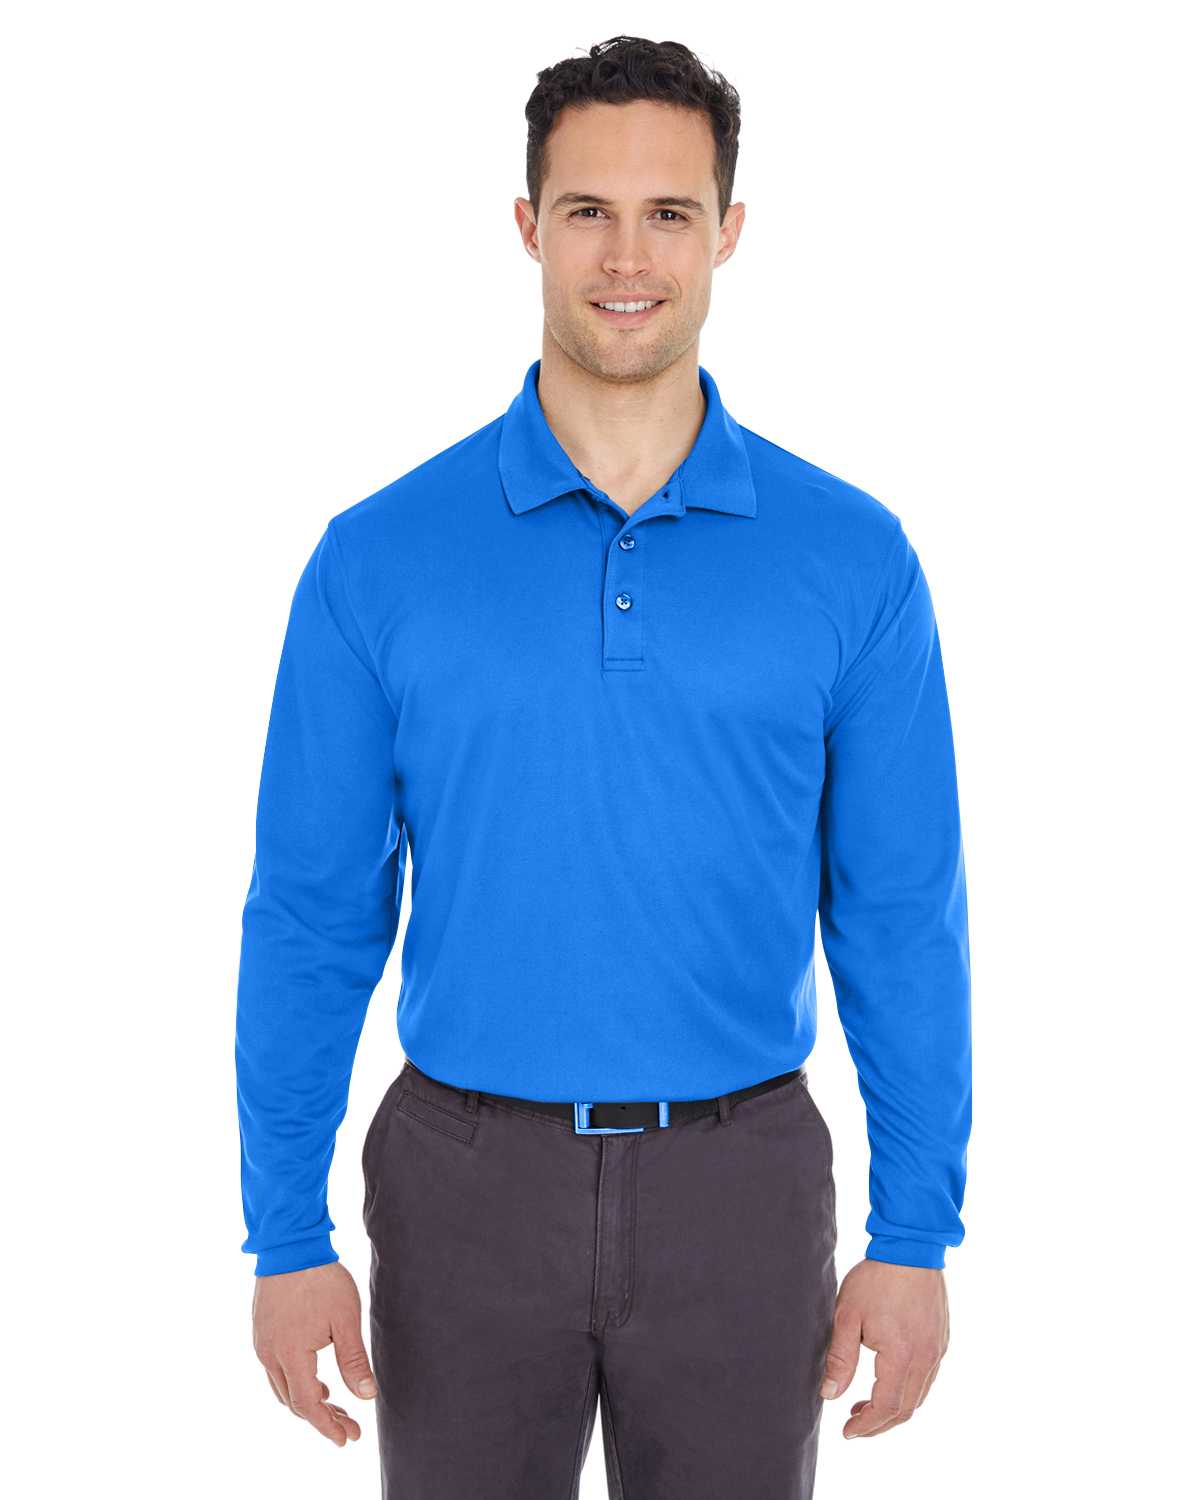 UltraClub 8210LS Adult Cool & Dry Long-Sleeve Mesh Pique Polo ...